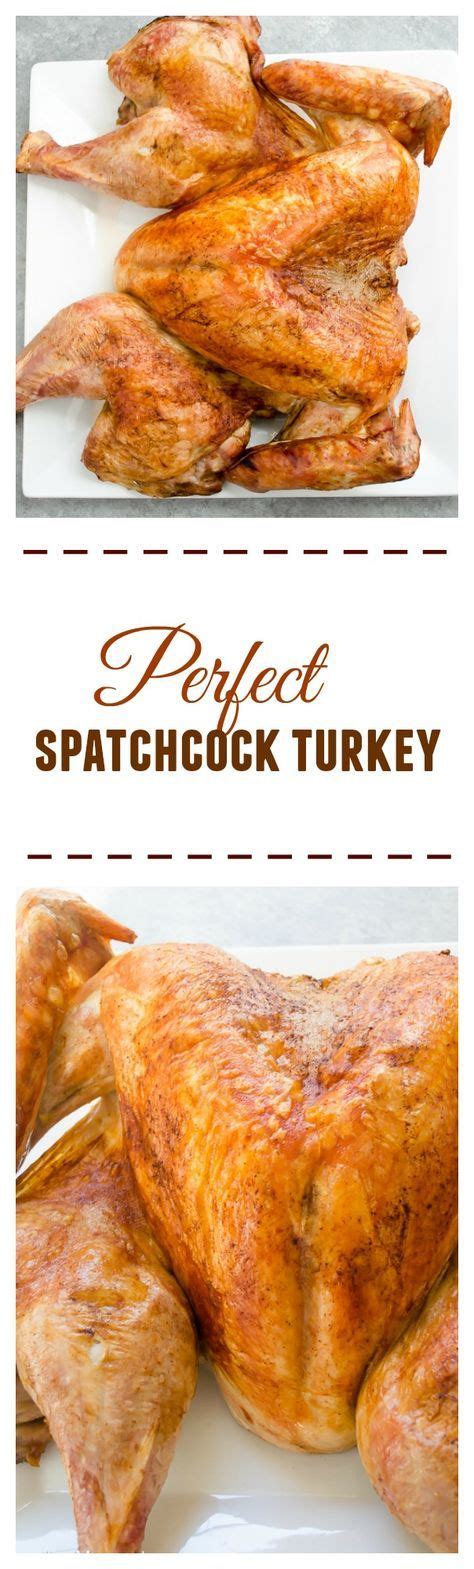 perfect spatchcock turkey poultry recipes turkey recipes chicken